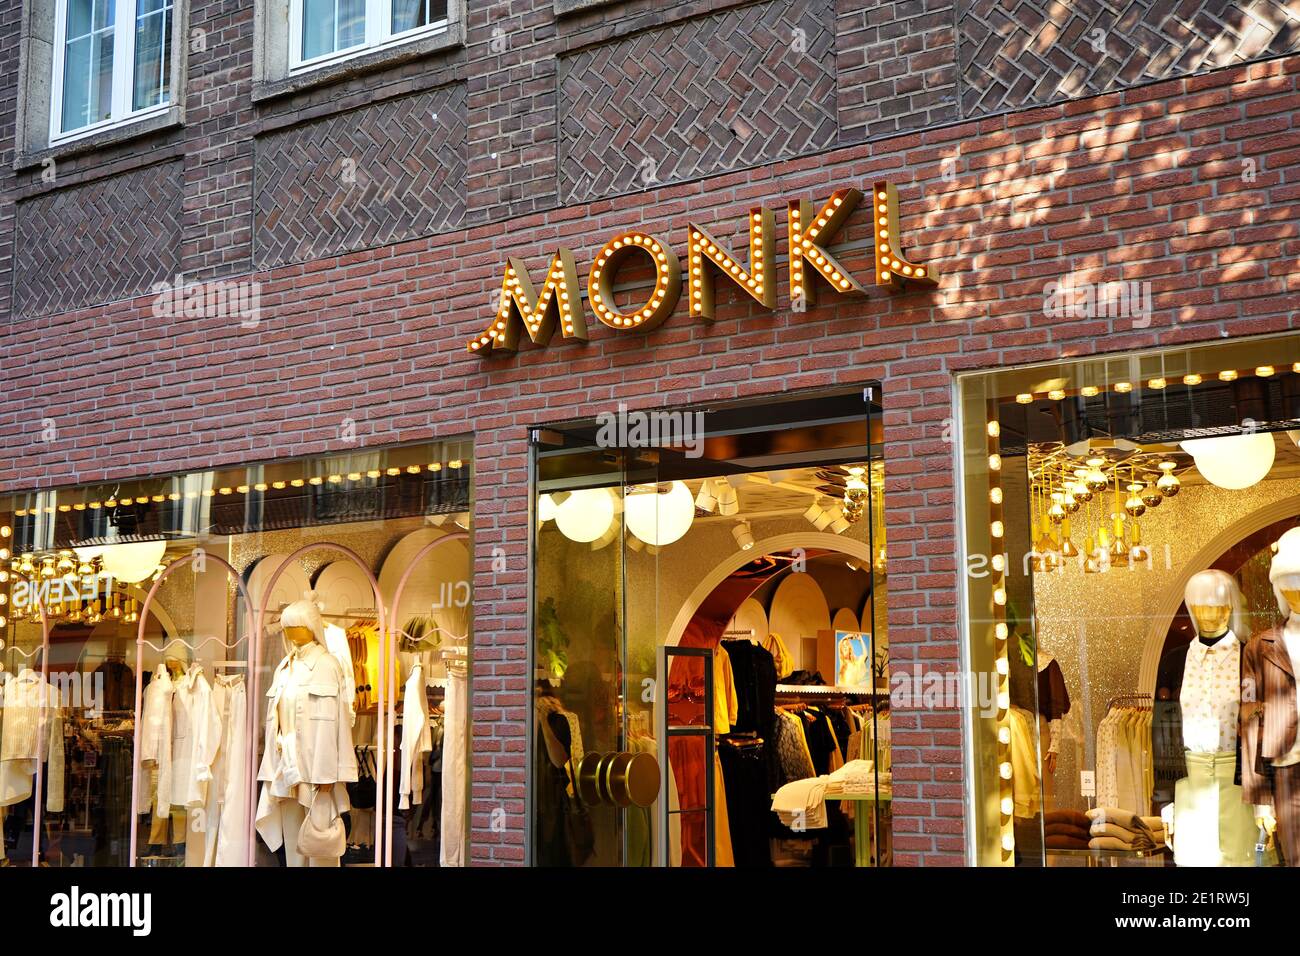 Monki store at Flinger Straße in Düsseldorf old town. Monki is a Swedish store chain for young fashion founded in 2006. It belongs to the H&M group. Stock Photo